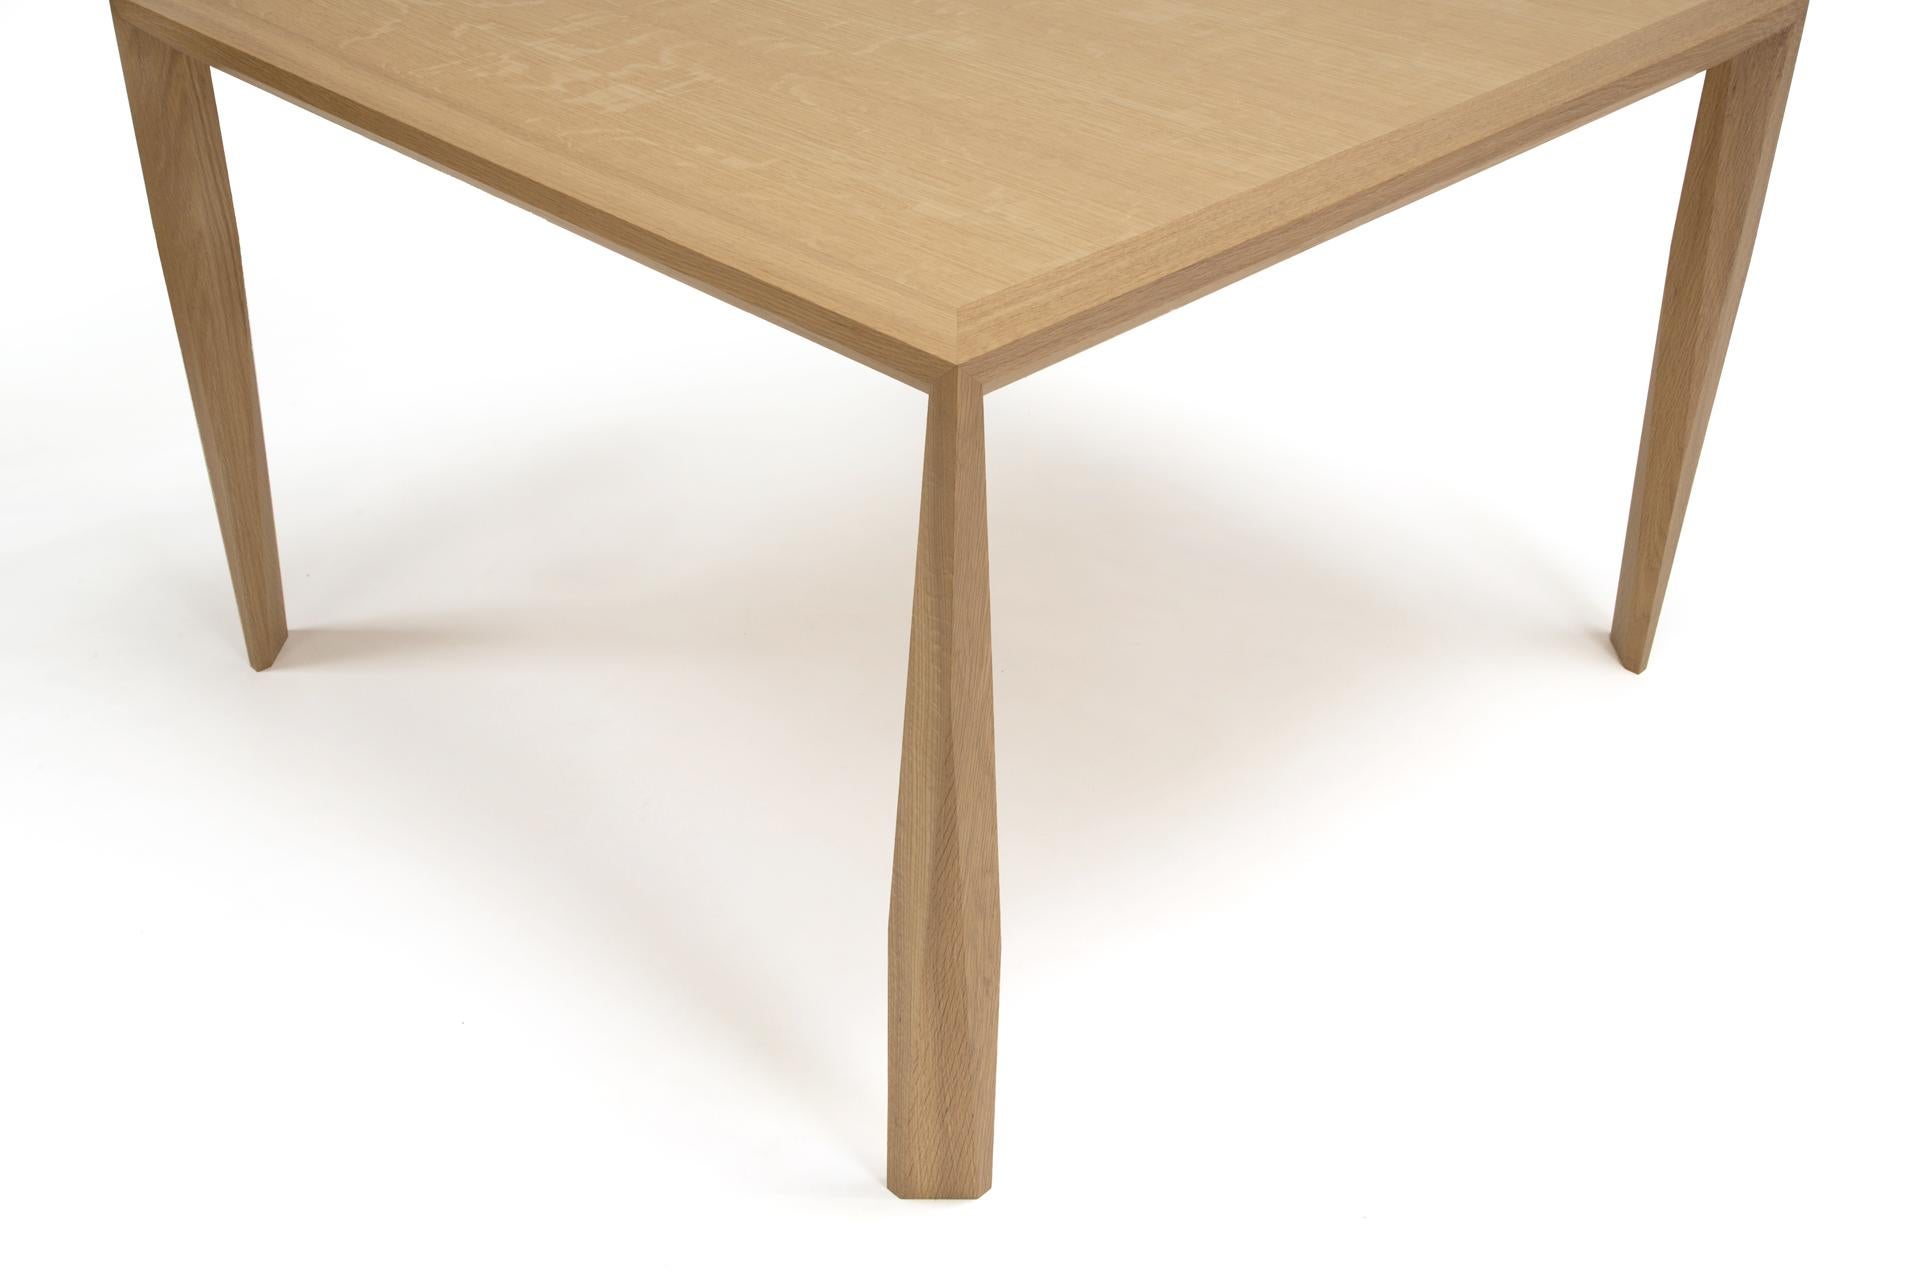 American Modern Wood Dining Table, in White Oak, by Studio DiPaolo For Sale